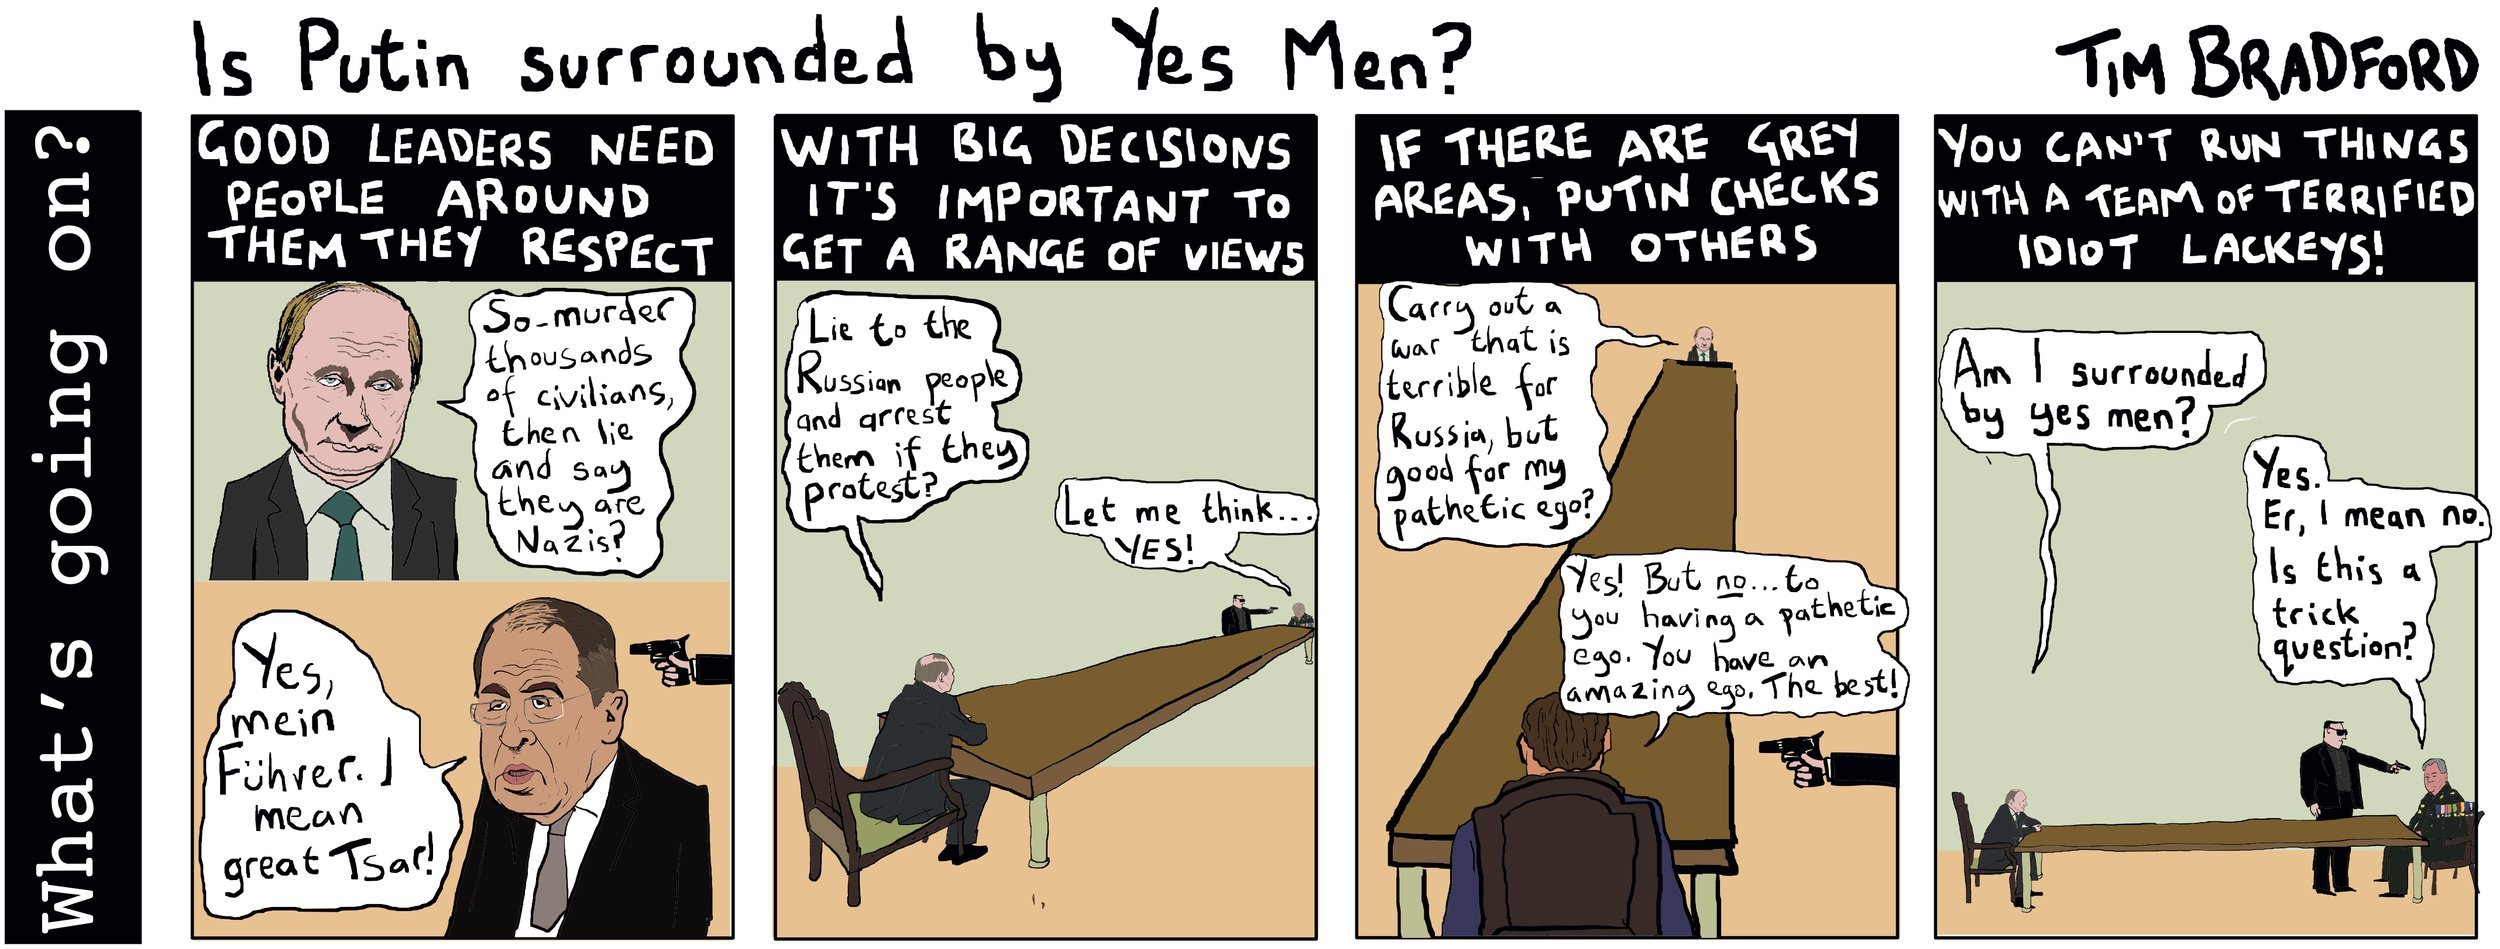 Is Putin surrounded by Yes Men? - 14/03/2022